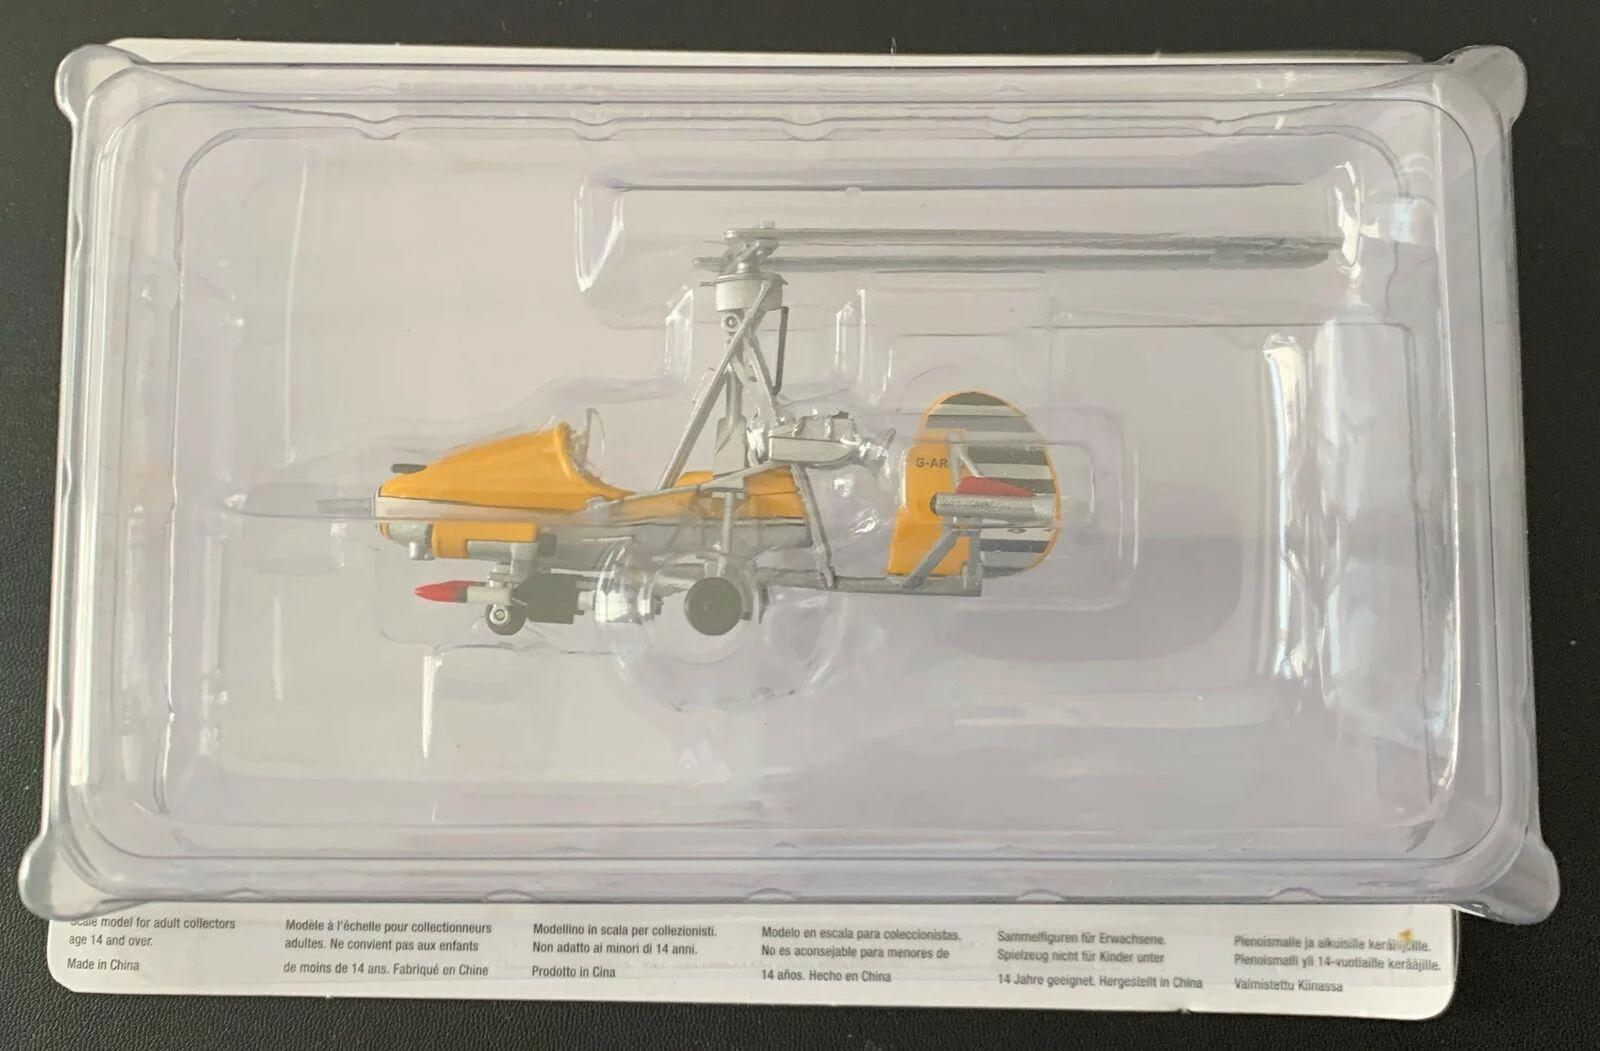 Little Nellie from the James Bond film You Only Live Twice with Sean Connery.  The Gyrocopter model is presented in a splitter pack